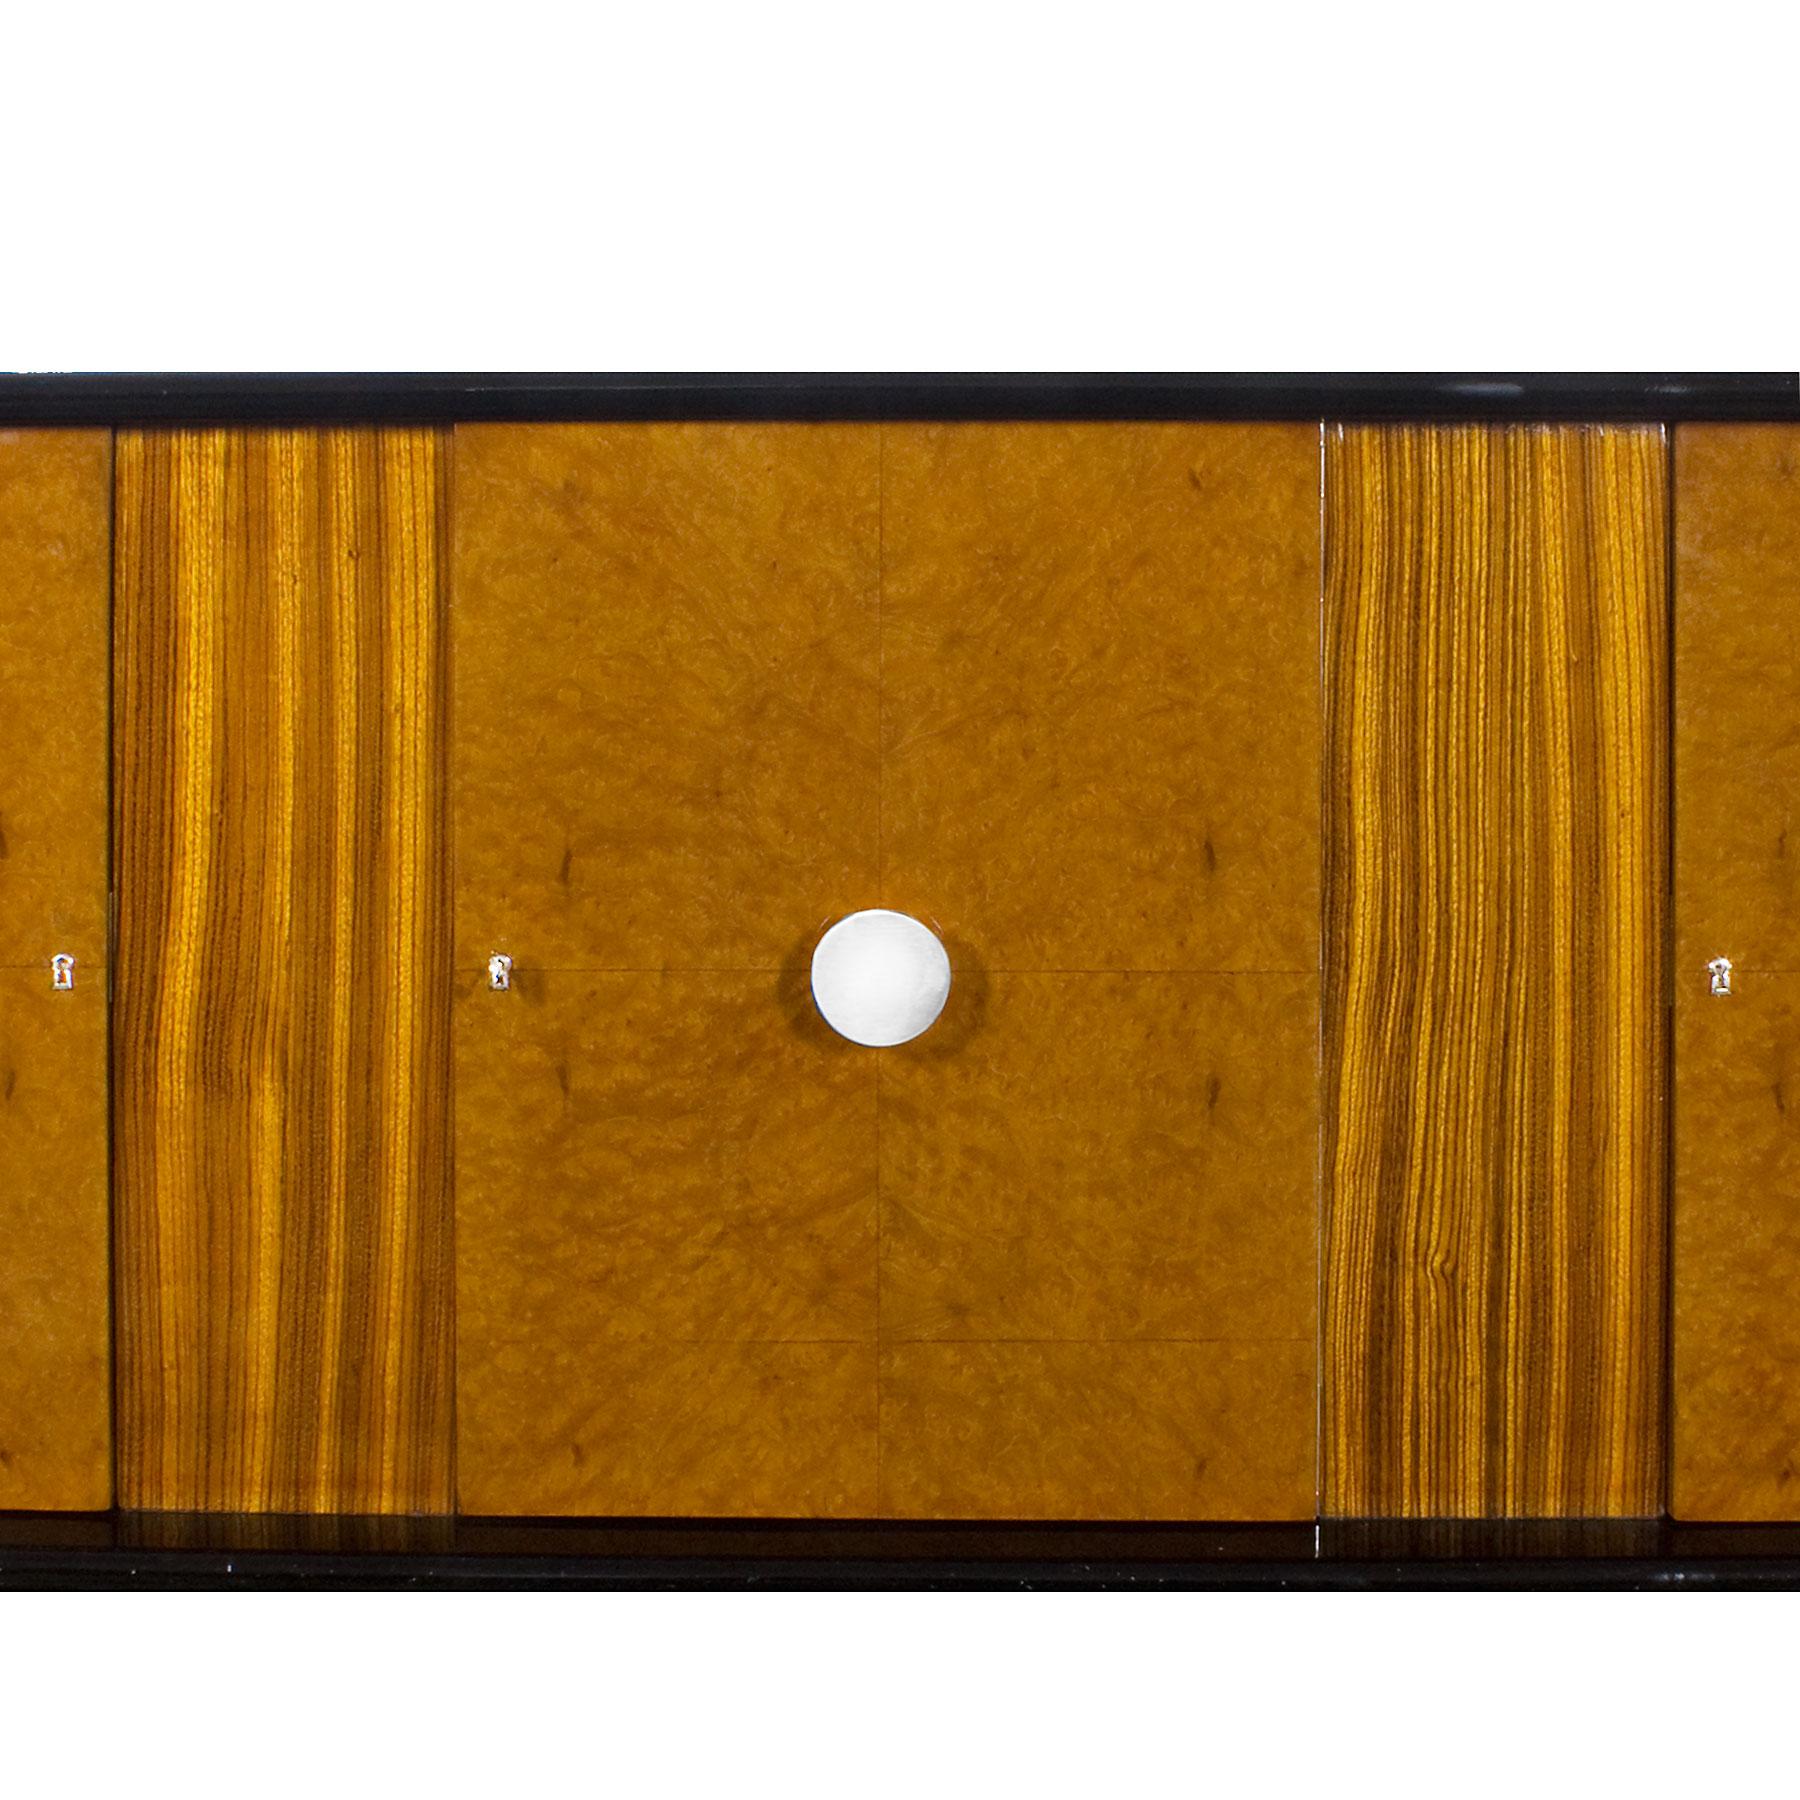 Mid-20th Century 1930s Art Deco Sideboard, Maple, Zebrano, Cherrywood, Black Lacquer - Italy For Sale